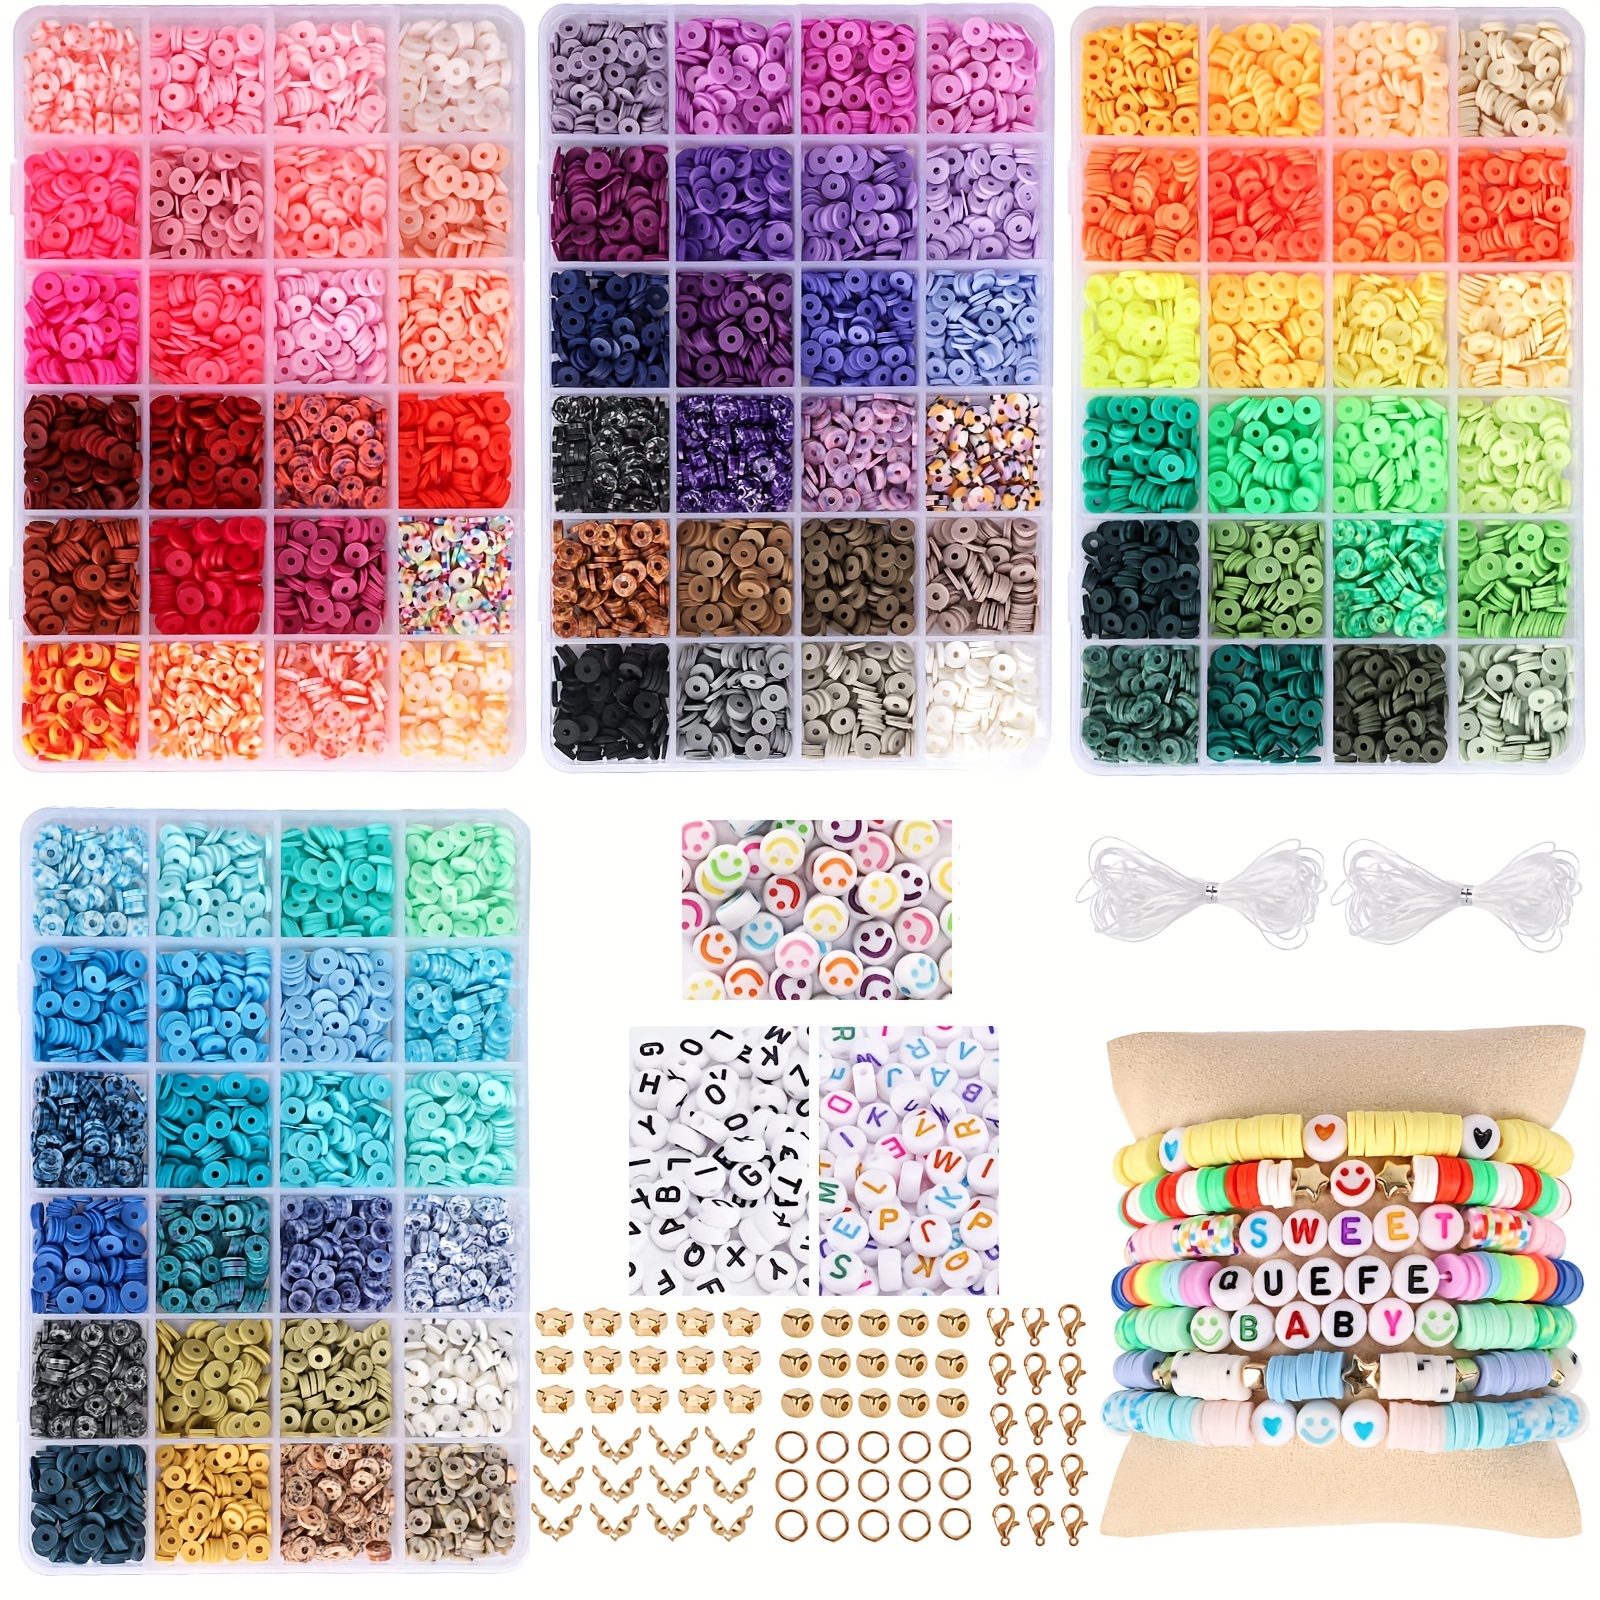 QUEFE 9000pcs, 72 Colors Clay Beads for Bracelet Making Kit for Girls 8-12,  Polymer Heishi Letter Beads for Jewelry Making, for Gifts, Crafts, Preppy